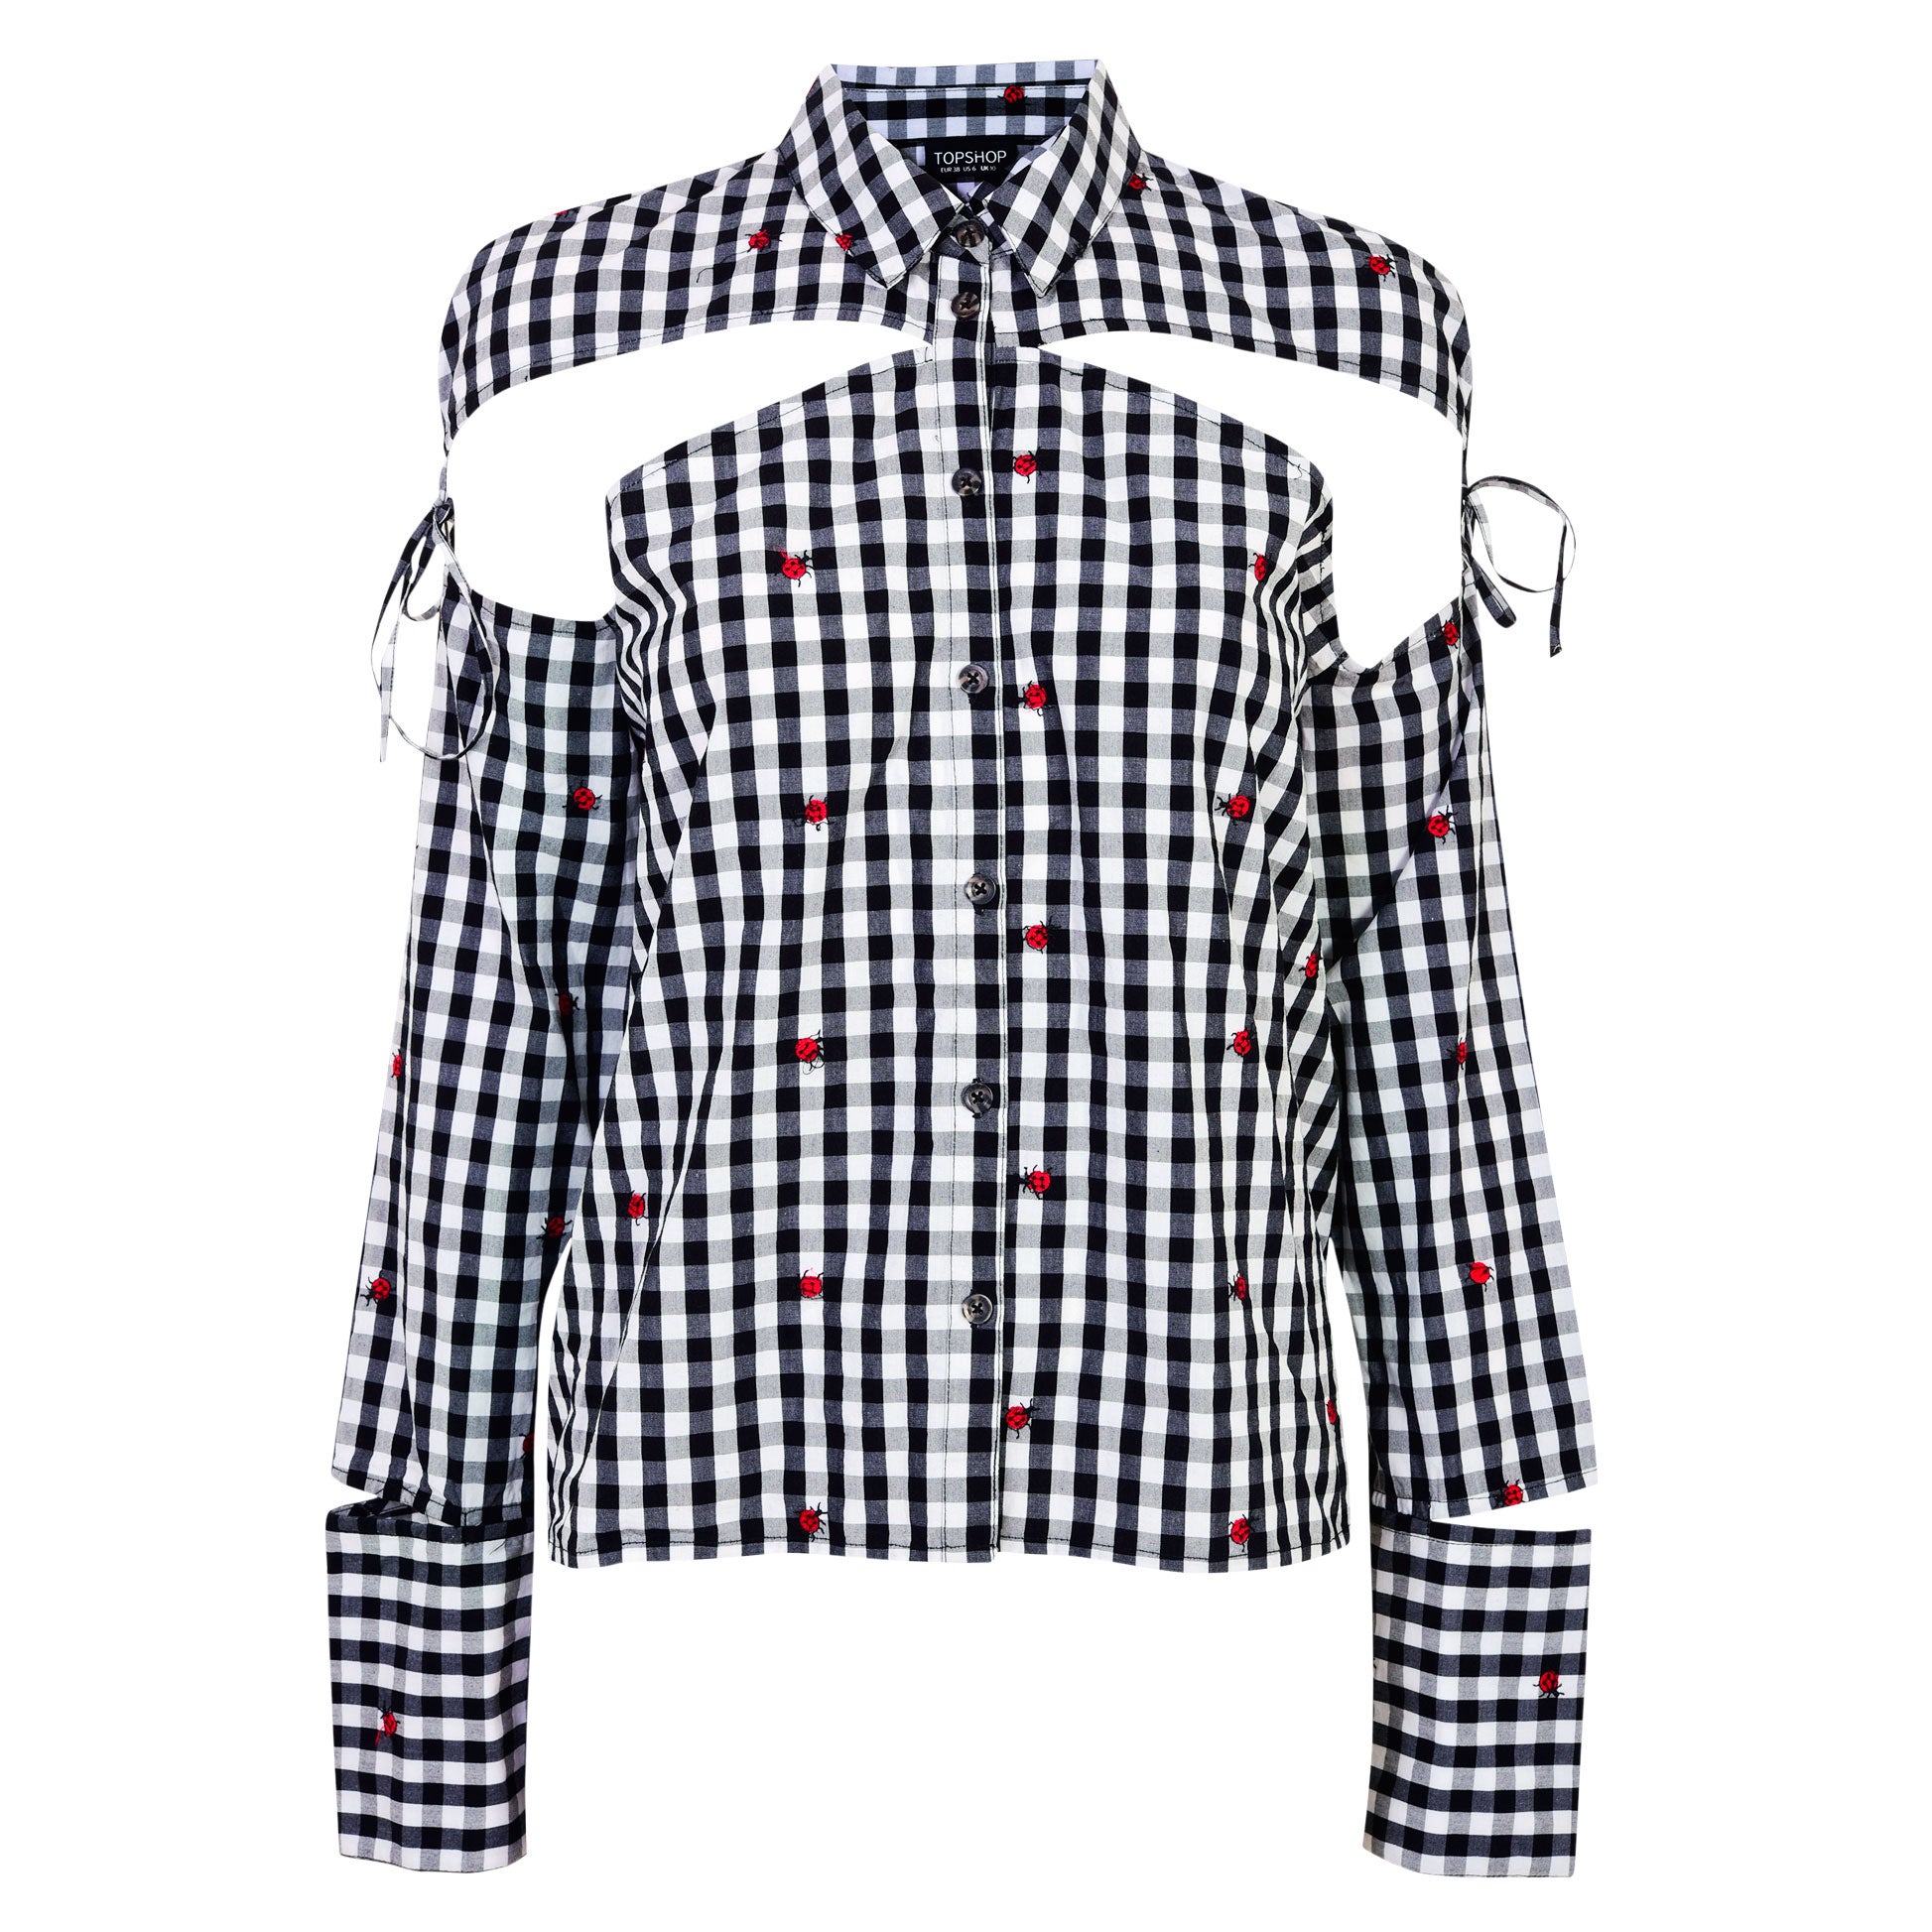 The Reworked Shirts You Need in Your Wardrobe This Spring
